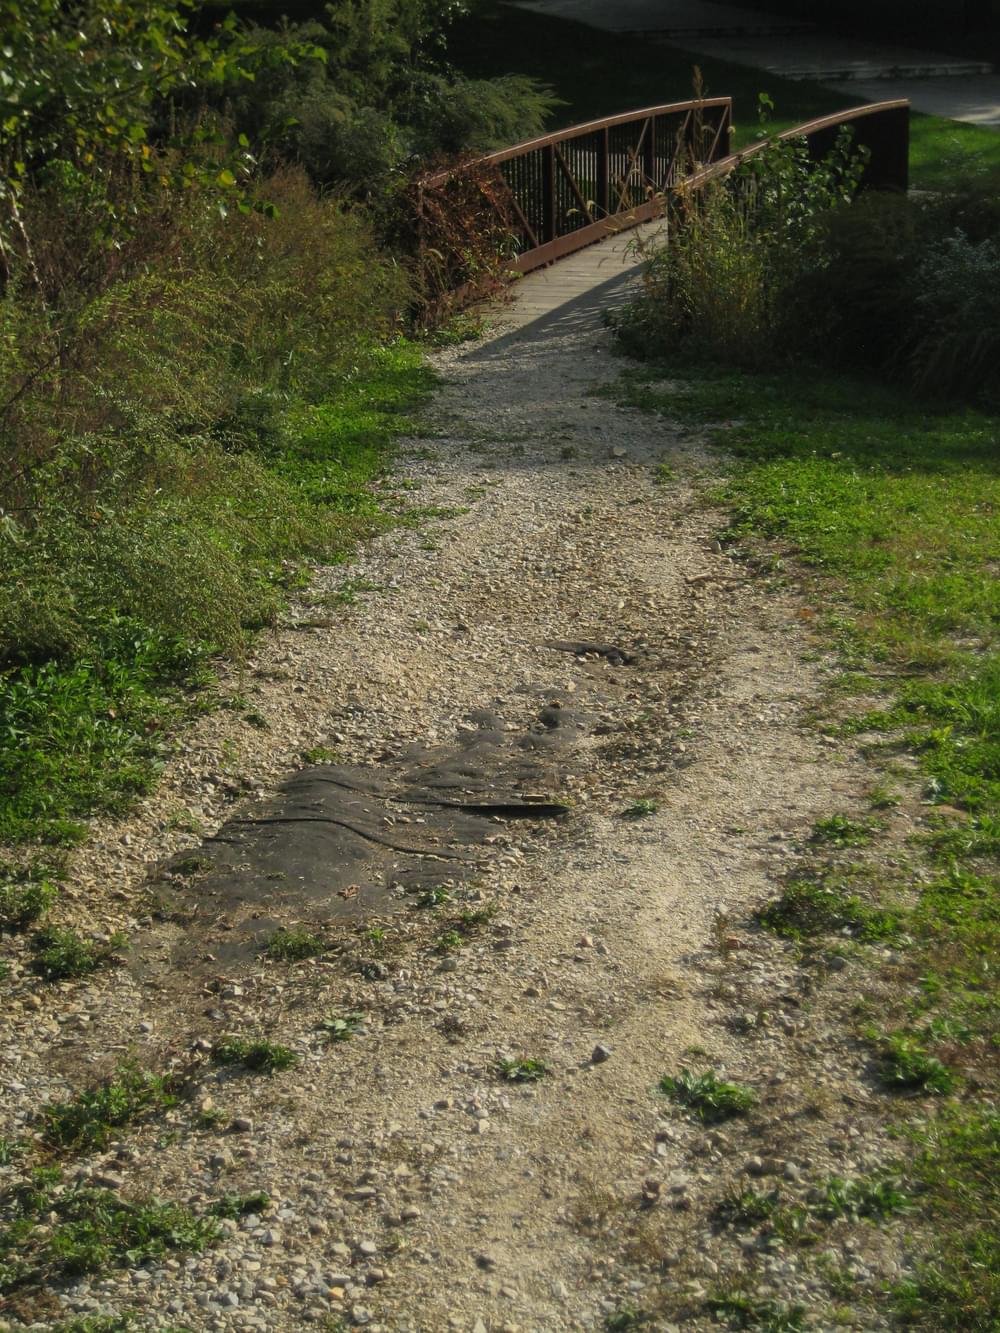 The landscape fabric is exposed due to runoff - the trail runs straight down the slope; Philadelphia, Pennsylvania